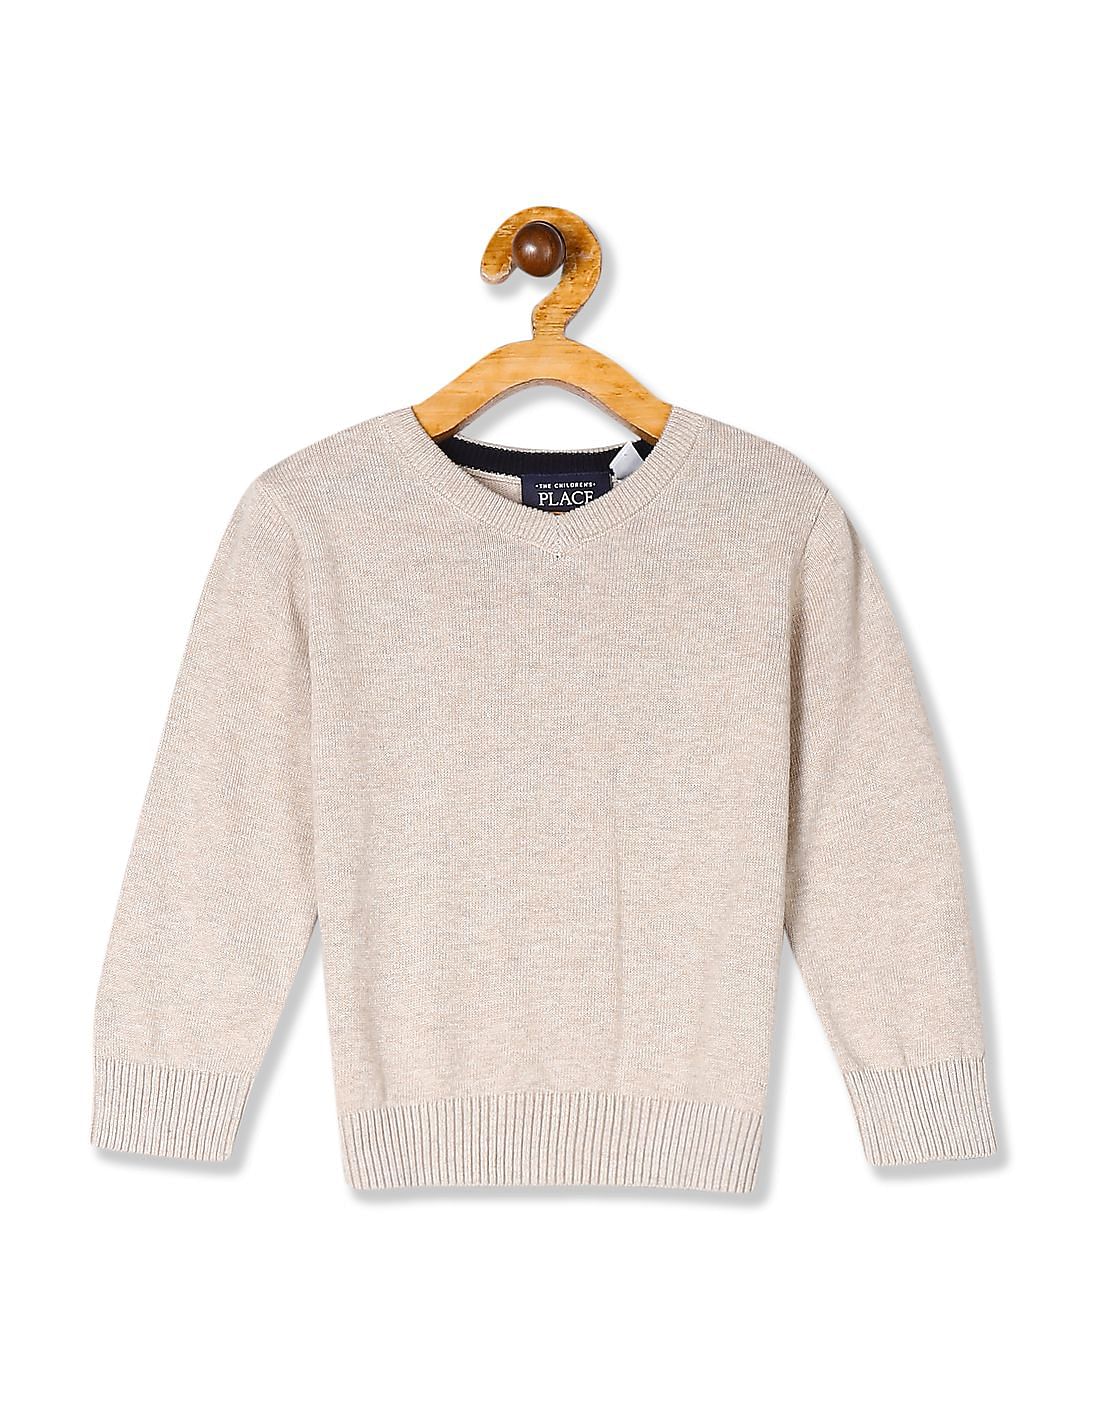 Buy The Children's Place Toddler Boy Beige Solid V-Neck Sweater - NNNOW.com